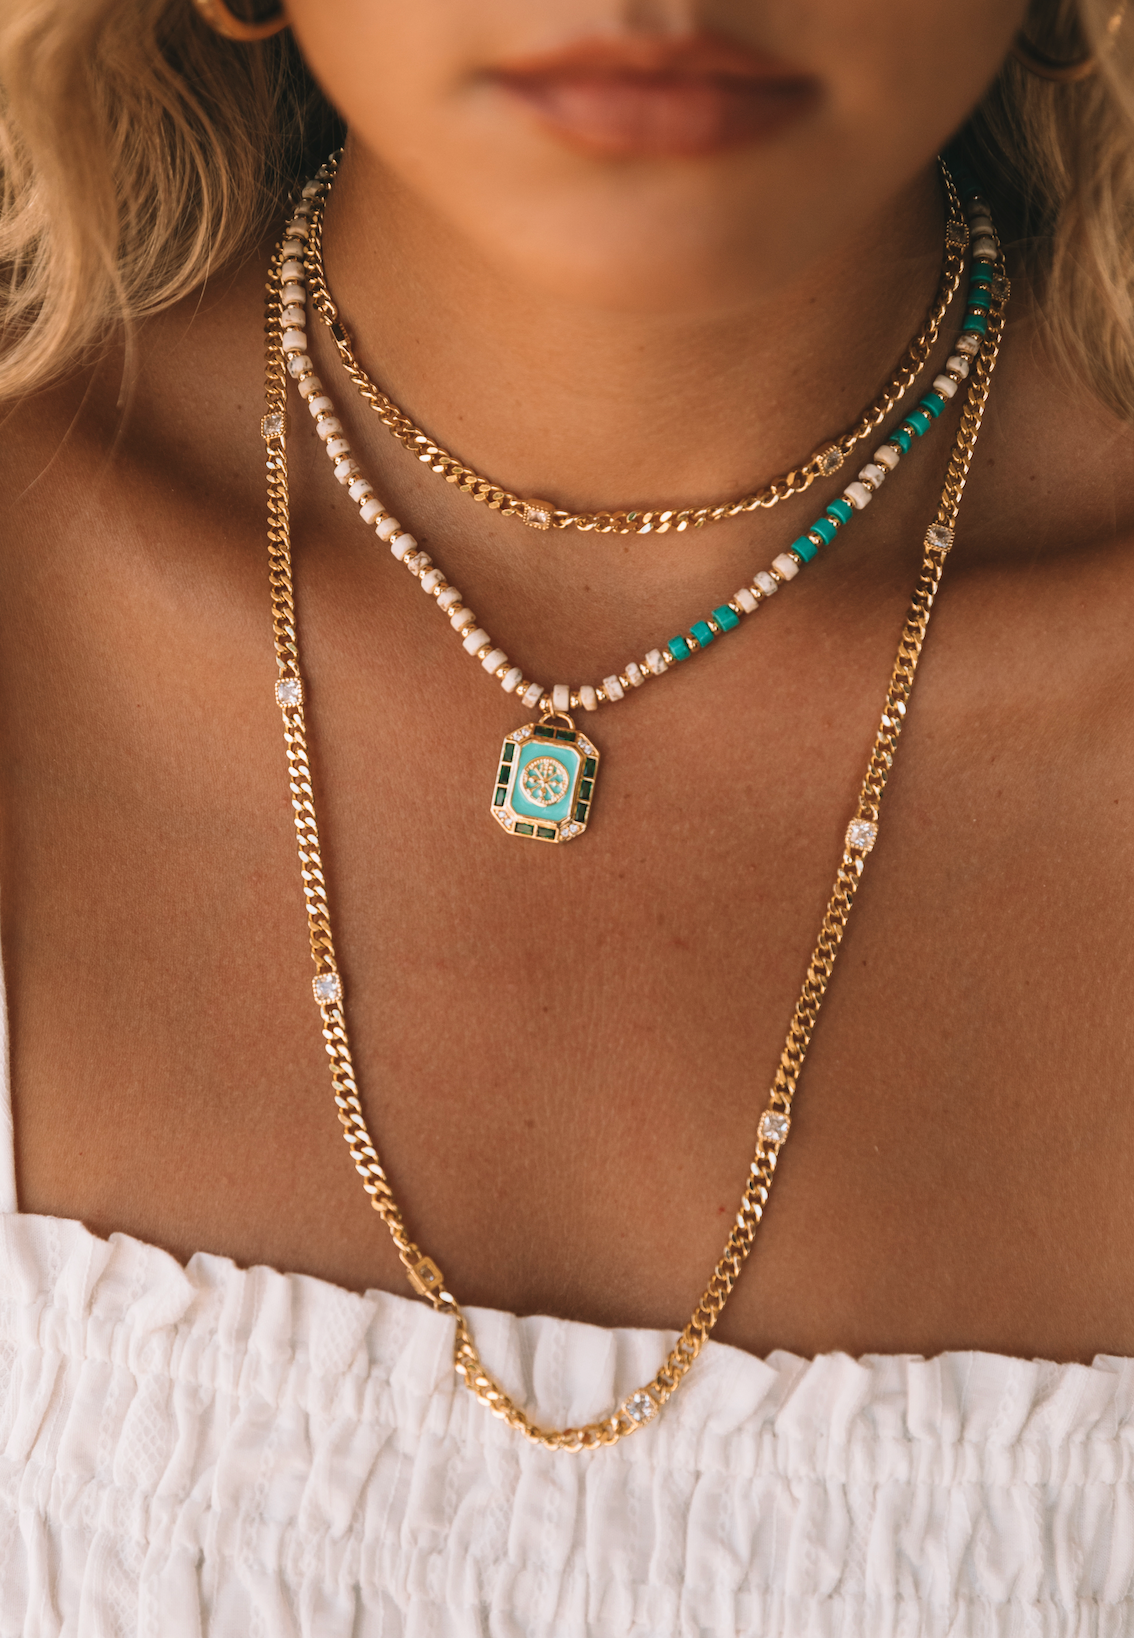 The Turquoise Tag Necklace